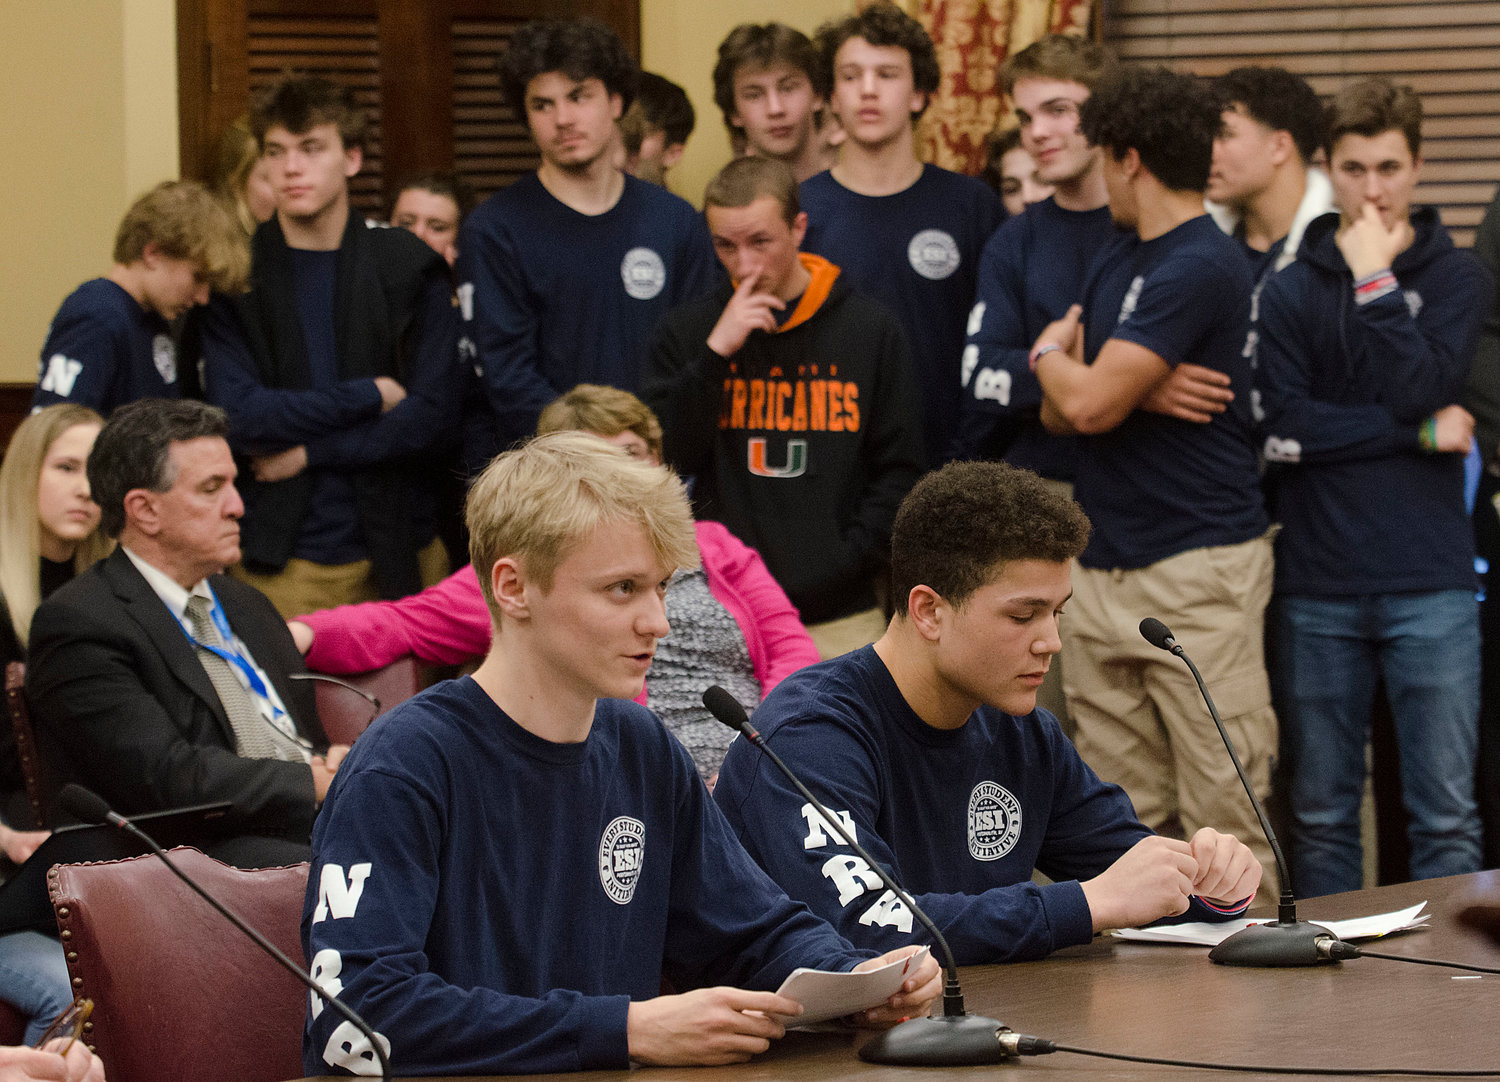 Owen Ross (left) and Marcus Evans, members of Every Student Initiative, testify before the Senate Committee on Education